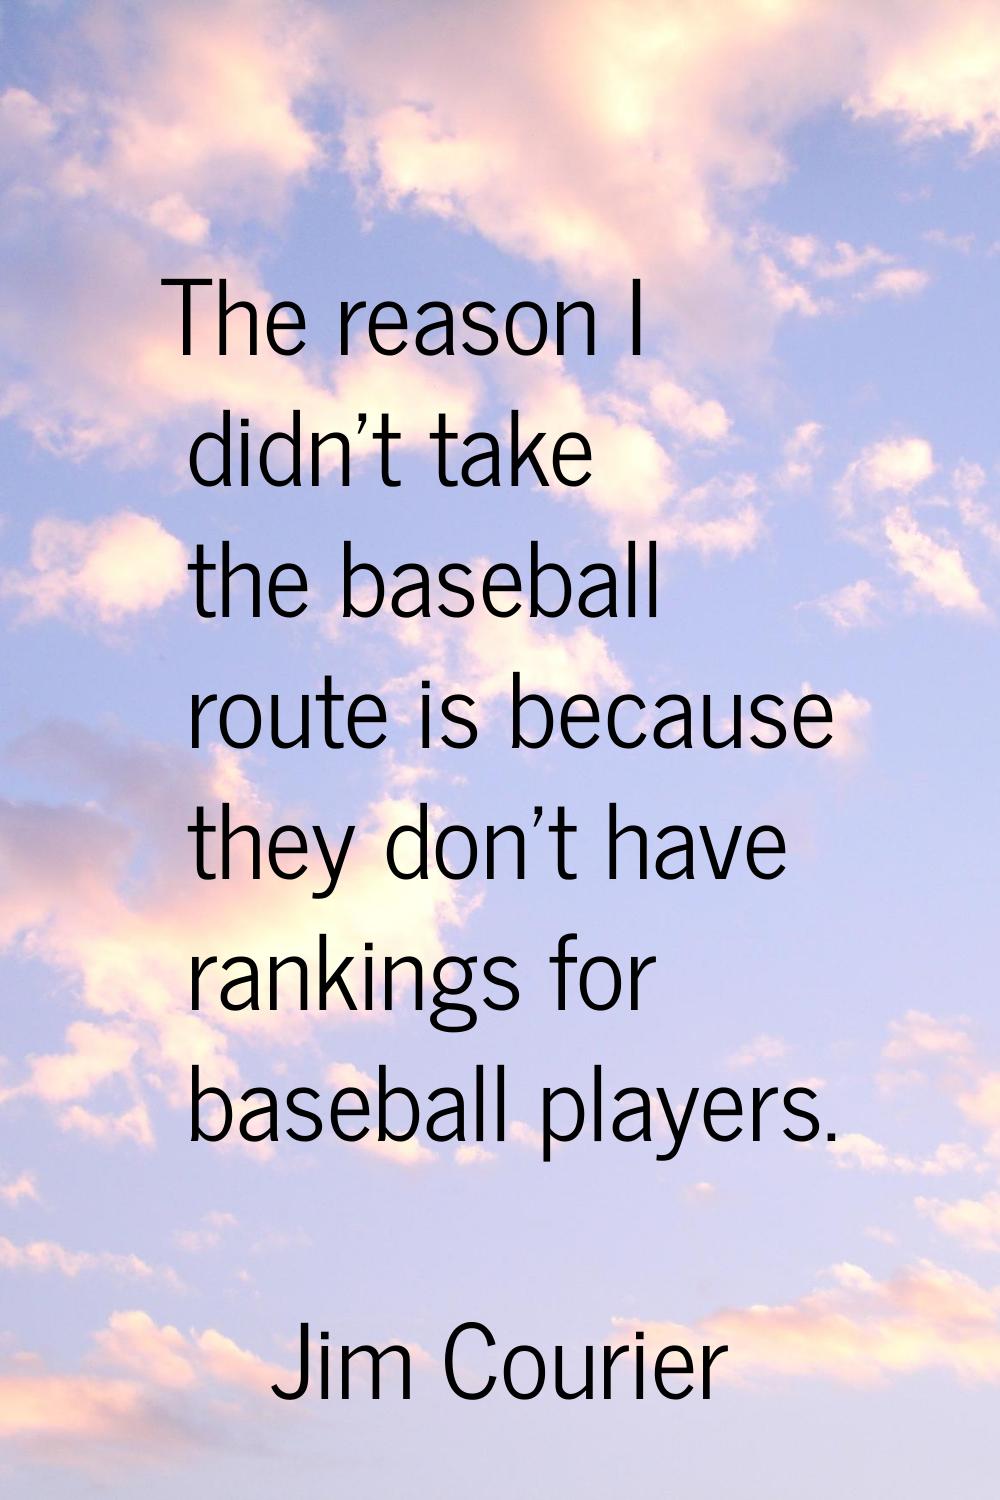 The reason I didn't take the baseball route is because they don't have rankings for baseball player